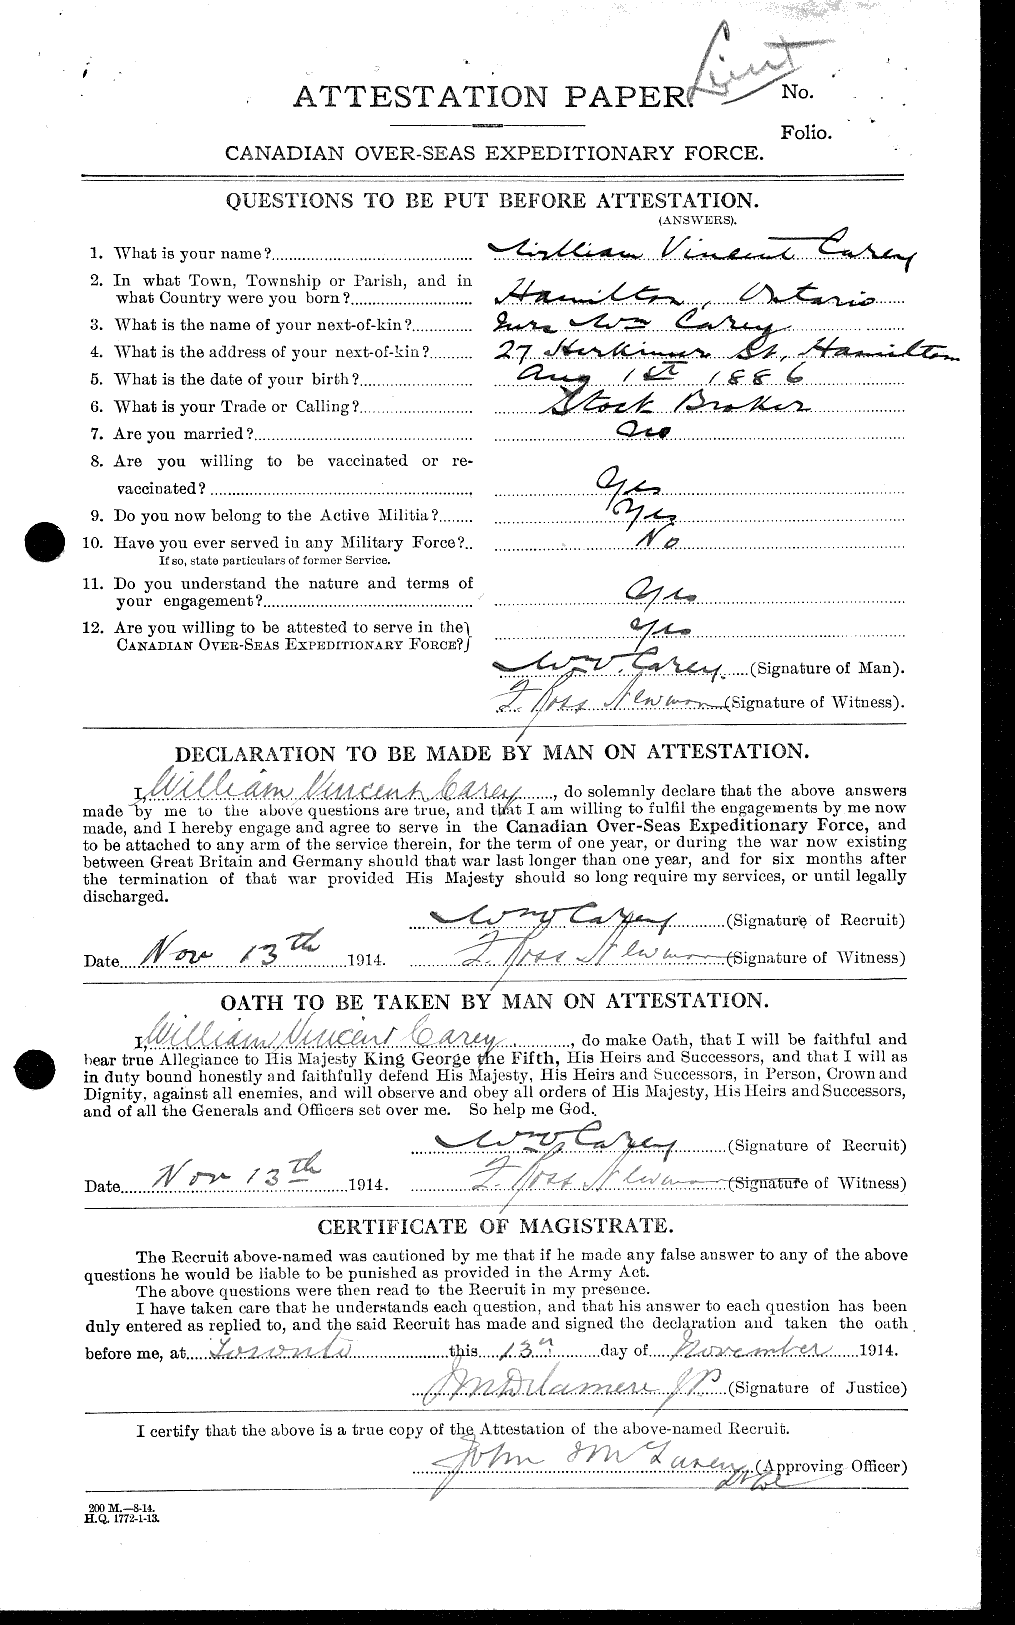 Personnel Records of the First World War - CEF 009402a